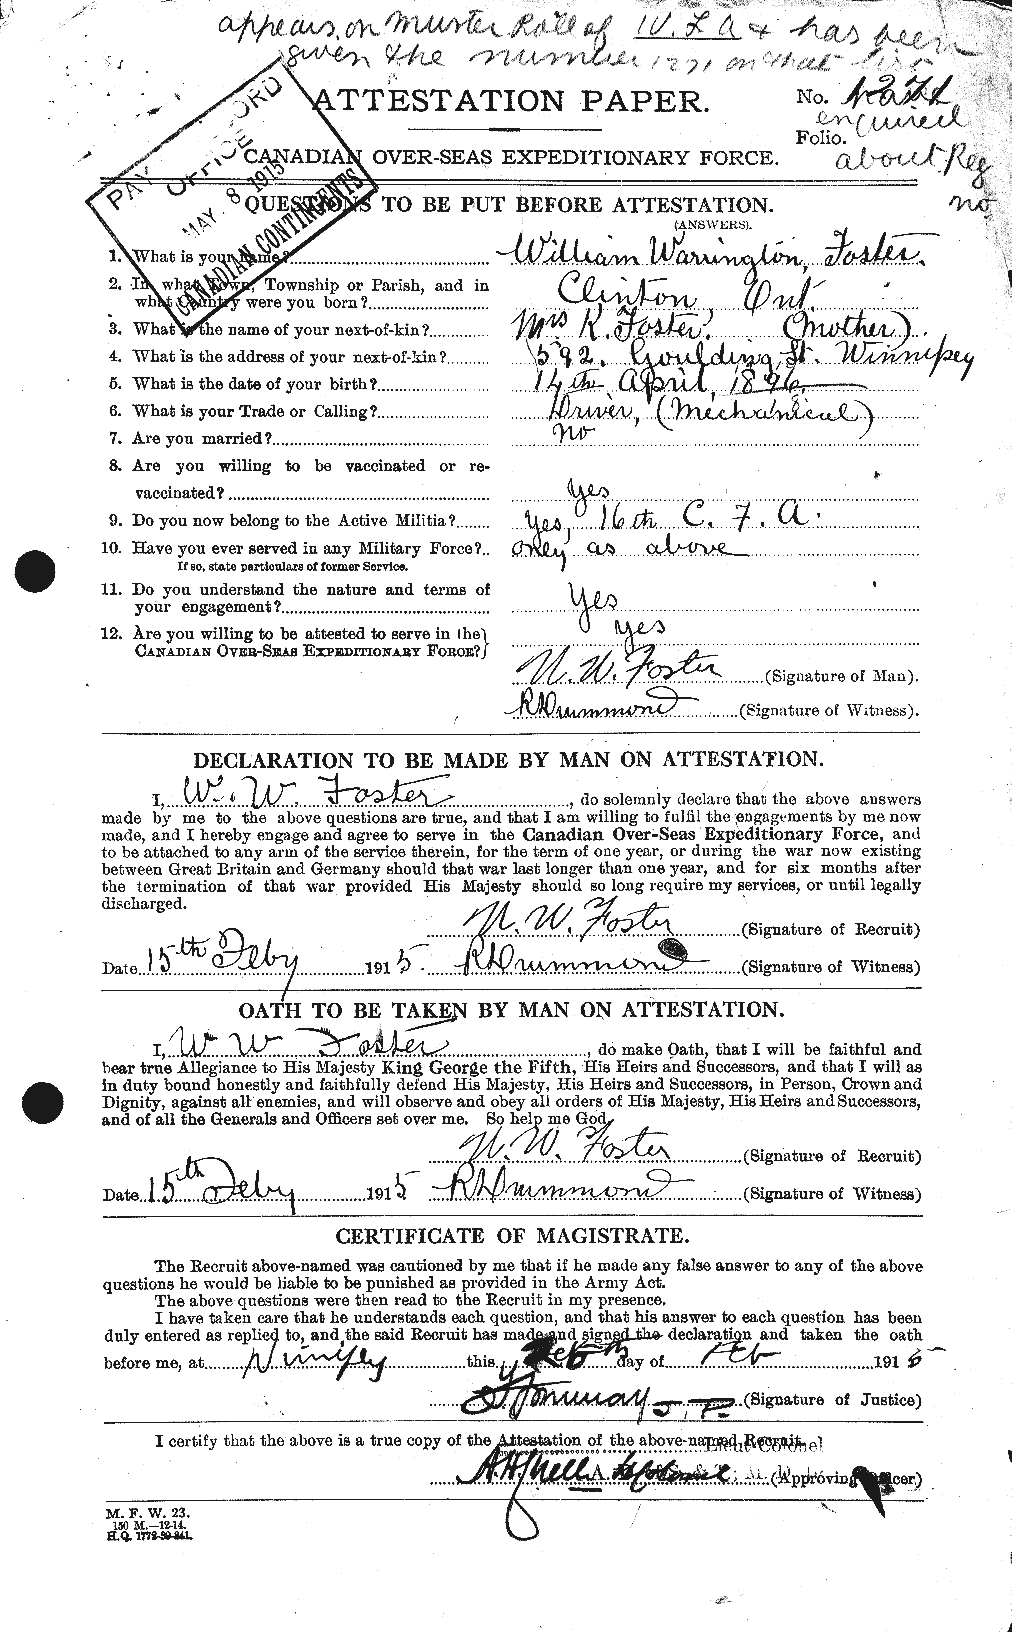 Personnel Records of the First World War - CEF 328775a